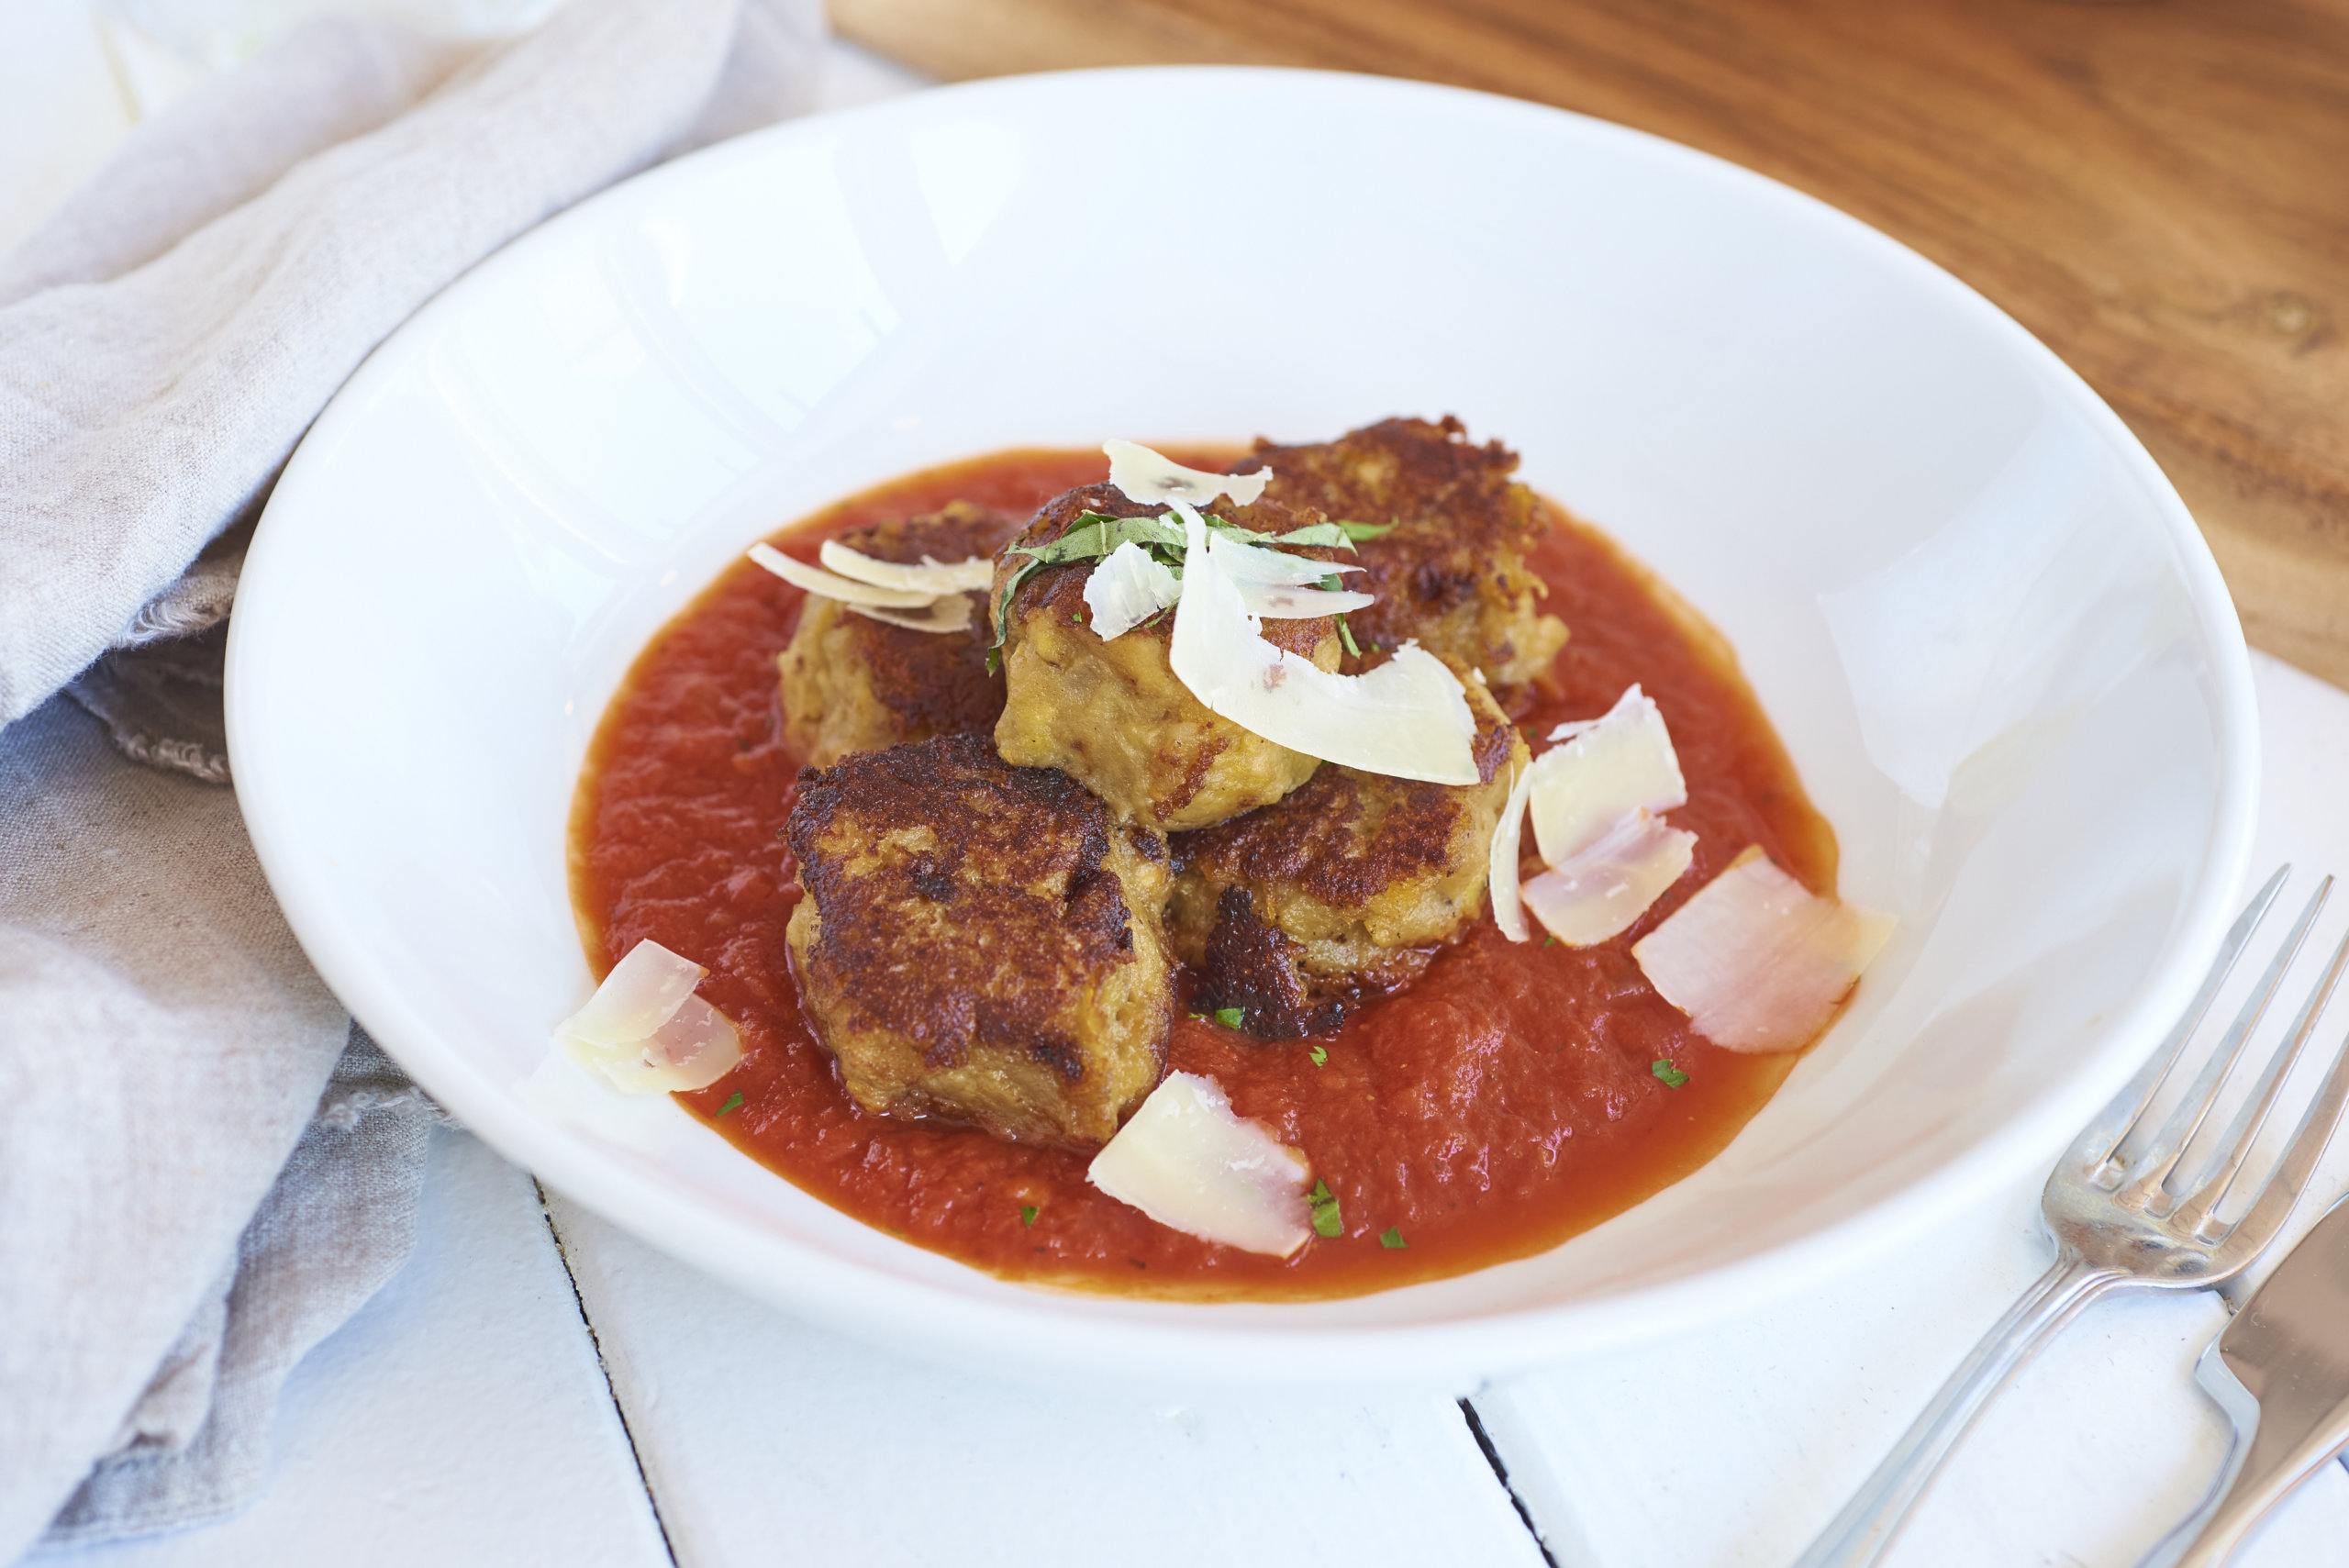 Eggplant meatballs from La Fin Kitchen & Lounge chef James Tchinnis